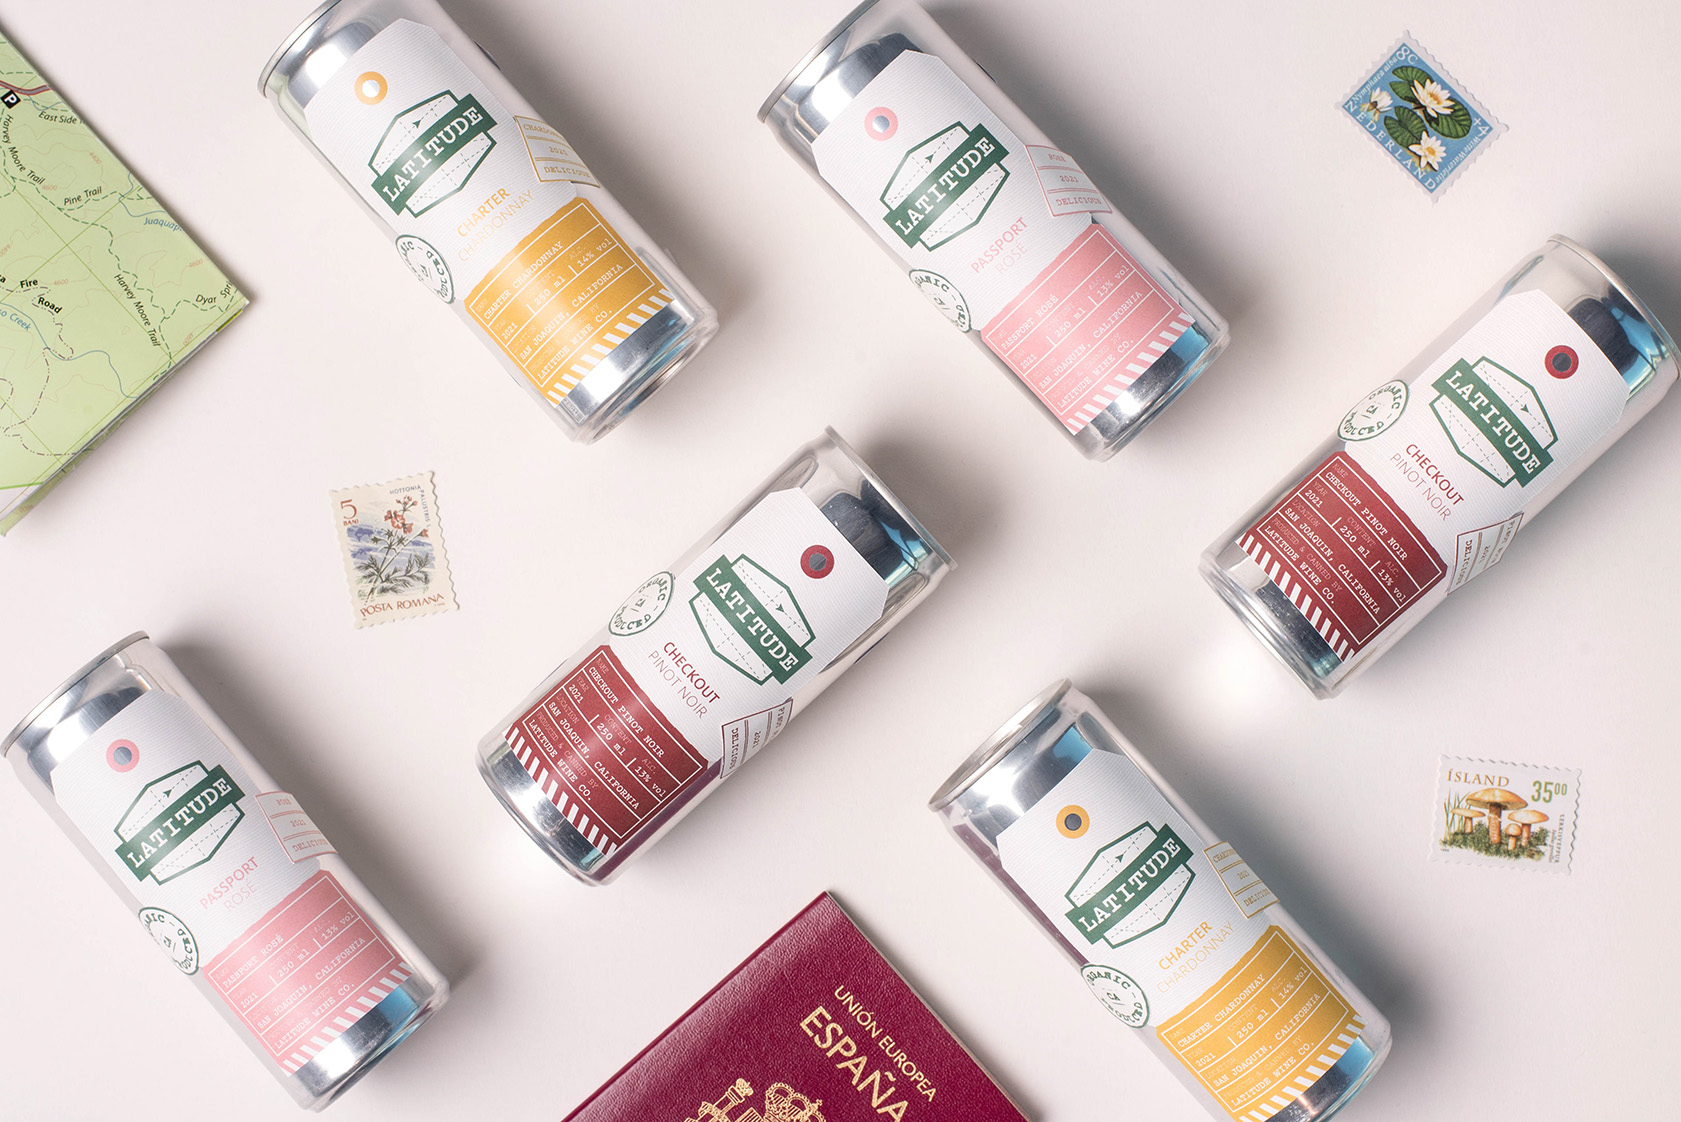 Student Packaging Design Concept For Latitude Travel-inspired Canned Wine